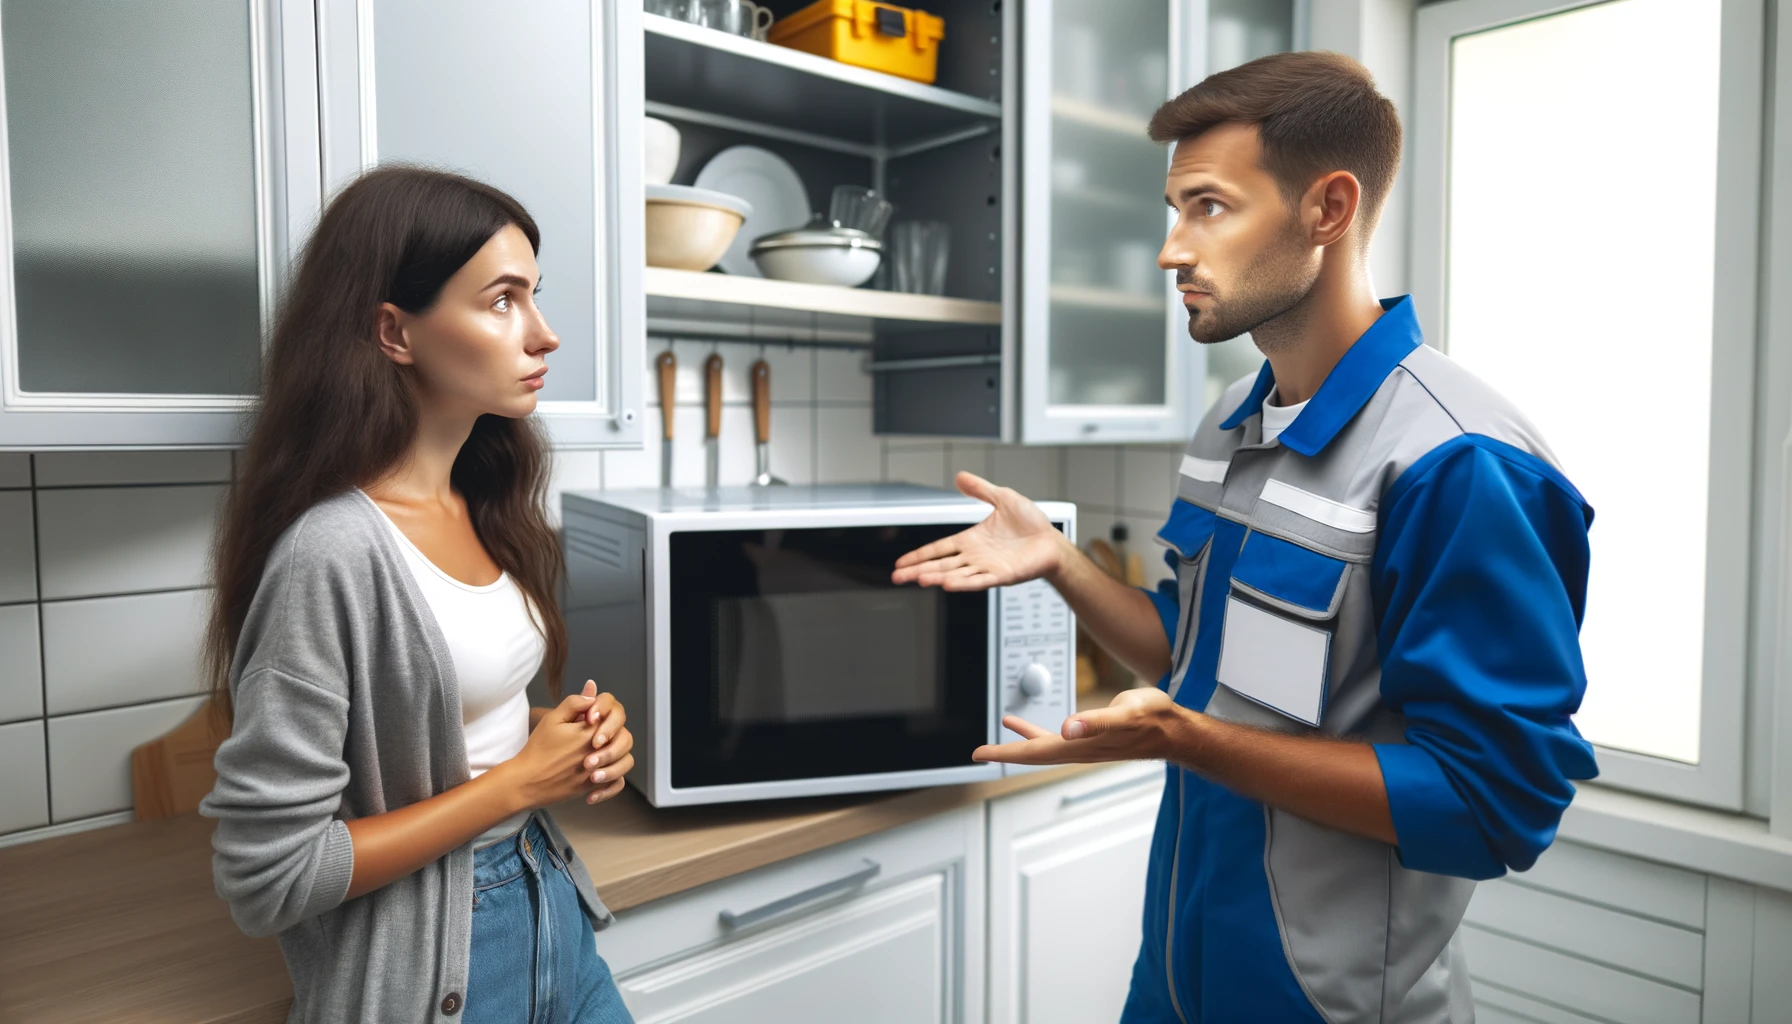 Image of top 5 Safety Tips for appliance repair